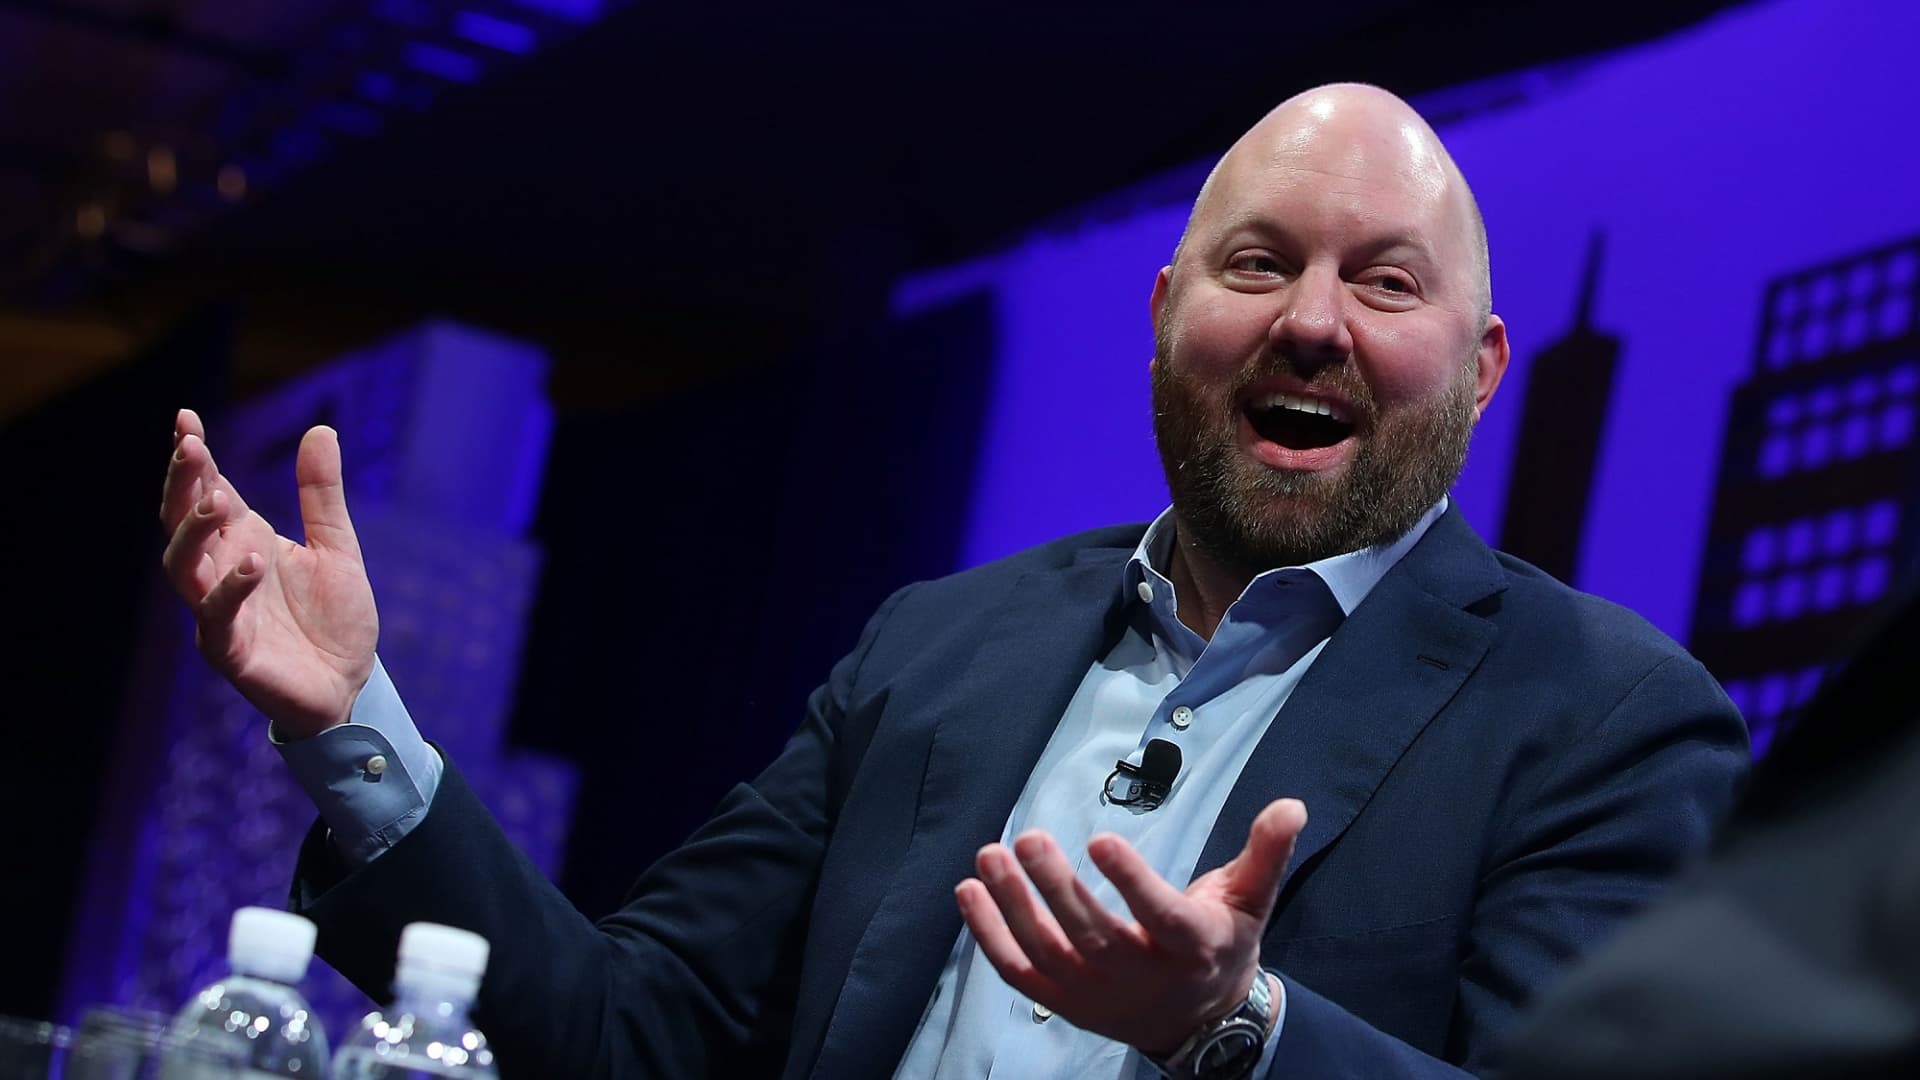 Silicon Valley billionaire VC Marc Andreessen recommends these 7 books